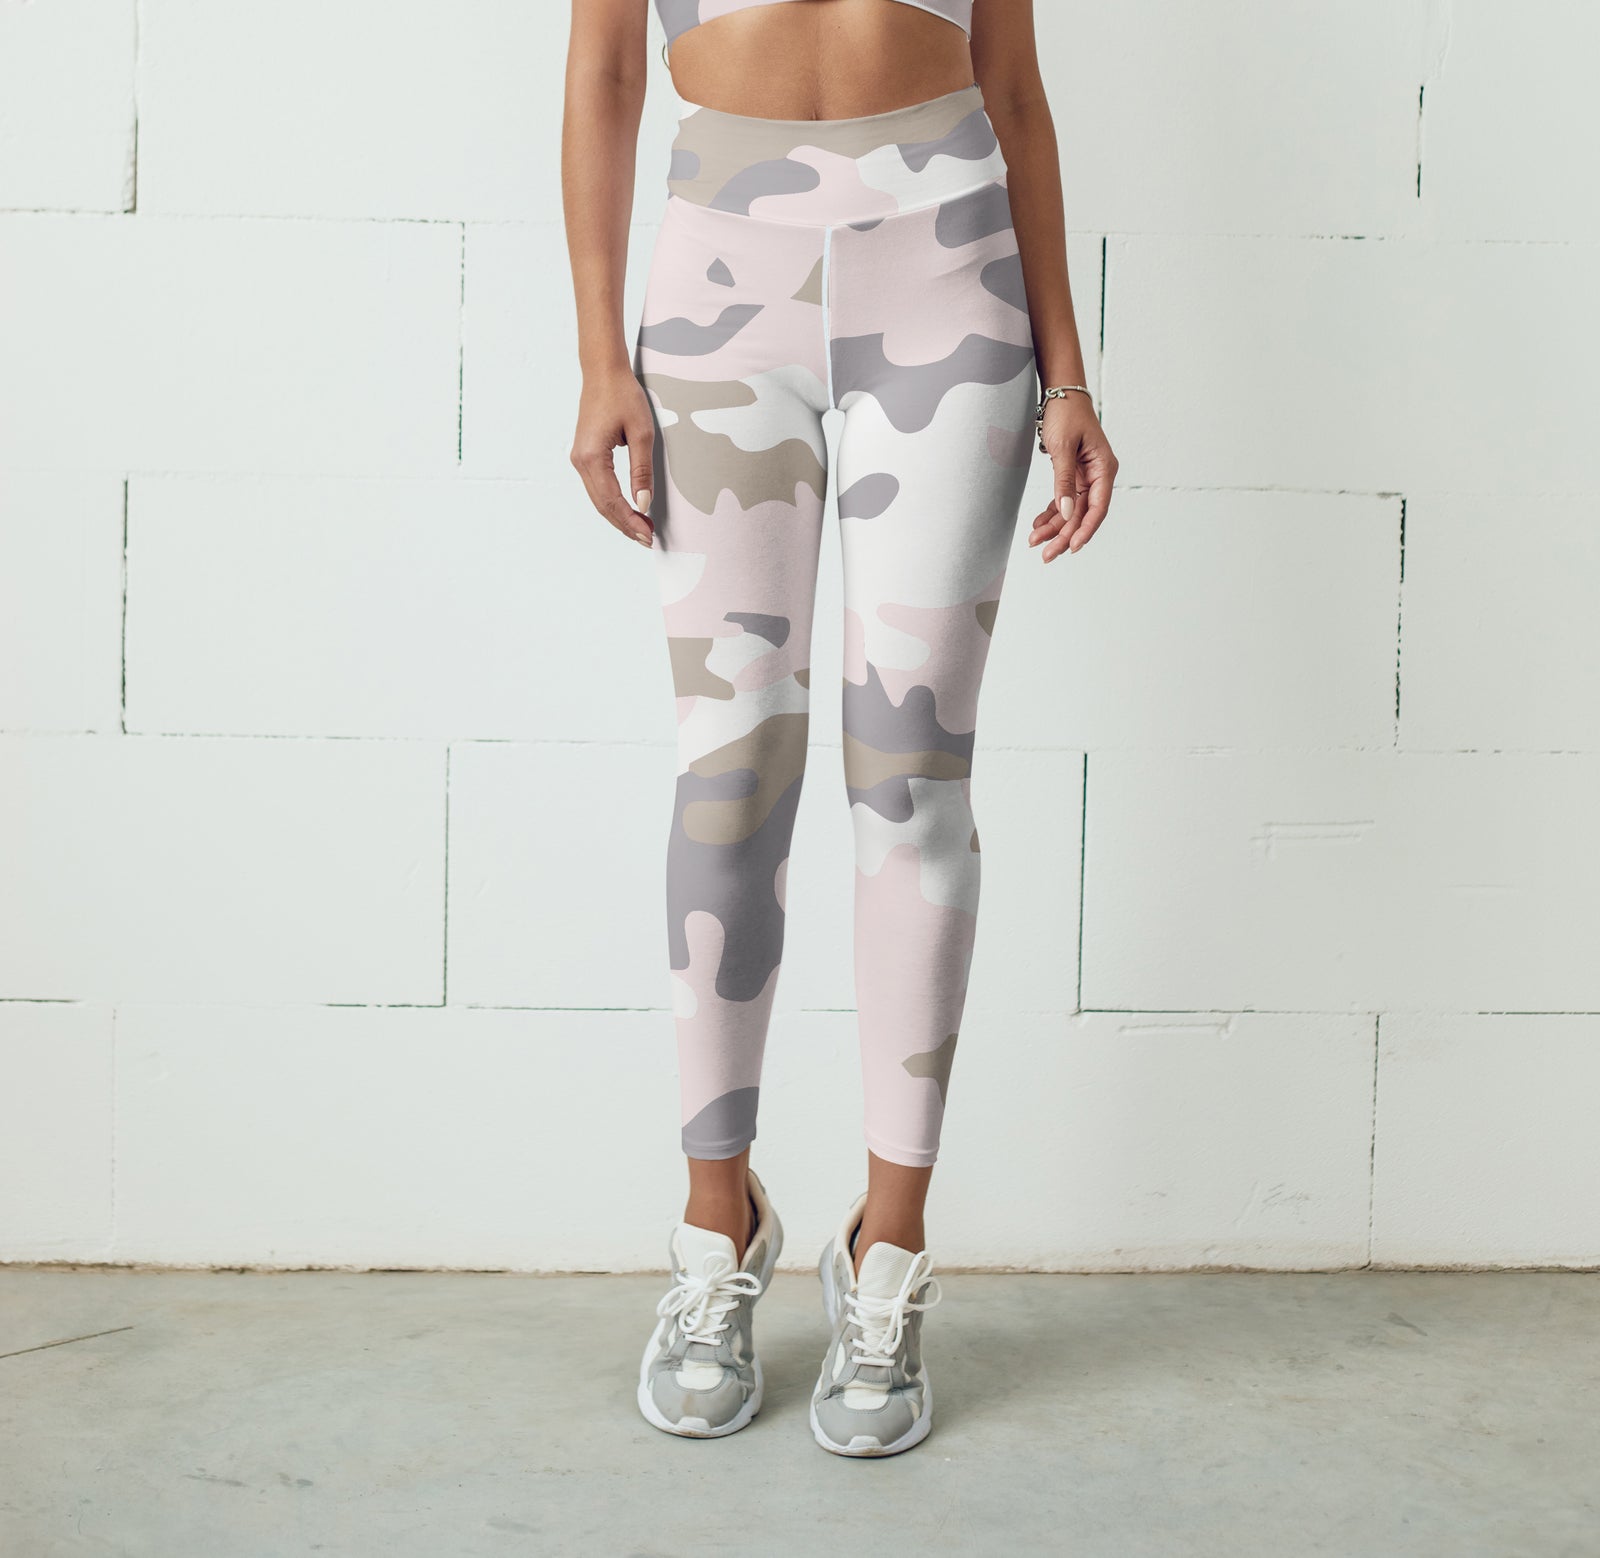 Athleisure Legging - All Good Laces